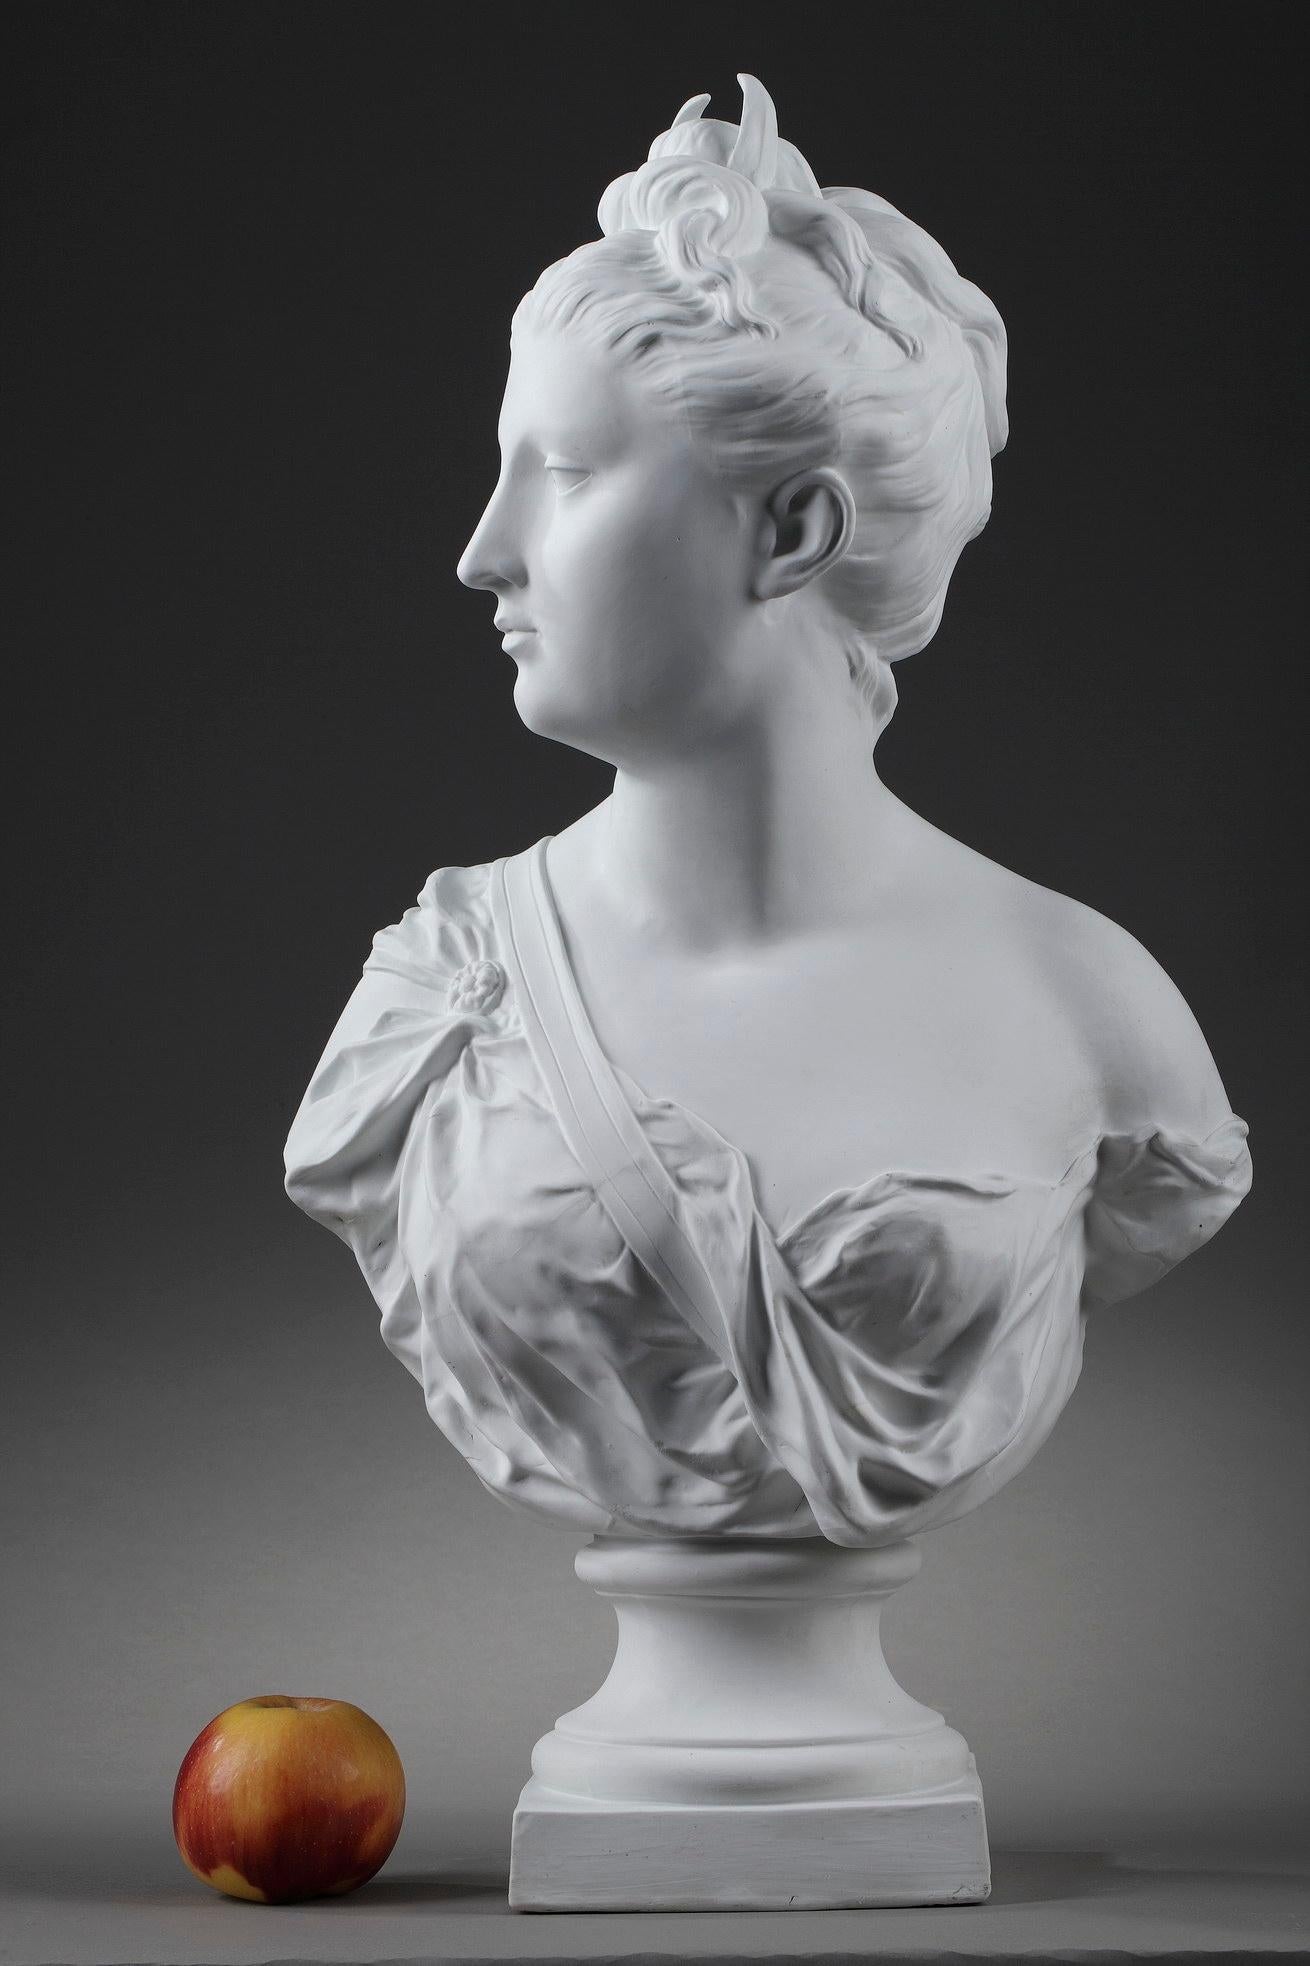 This bust crafted of bisque porcelain features Diana the Huntress after Jean-Antoine Houdon (French, 1741- 1828). Diana, in Roman mythology, is the goddess of wild animals and hunt, identified with the Greek goddess Artemis. Our biscuit statue is